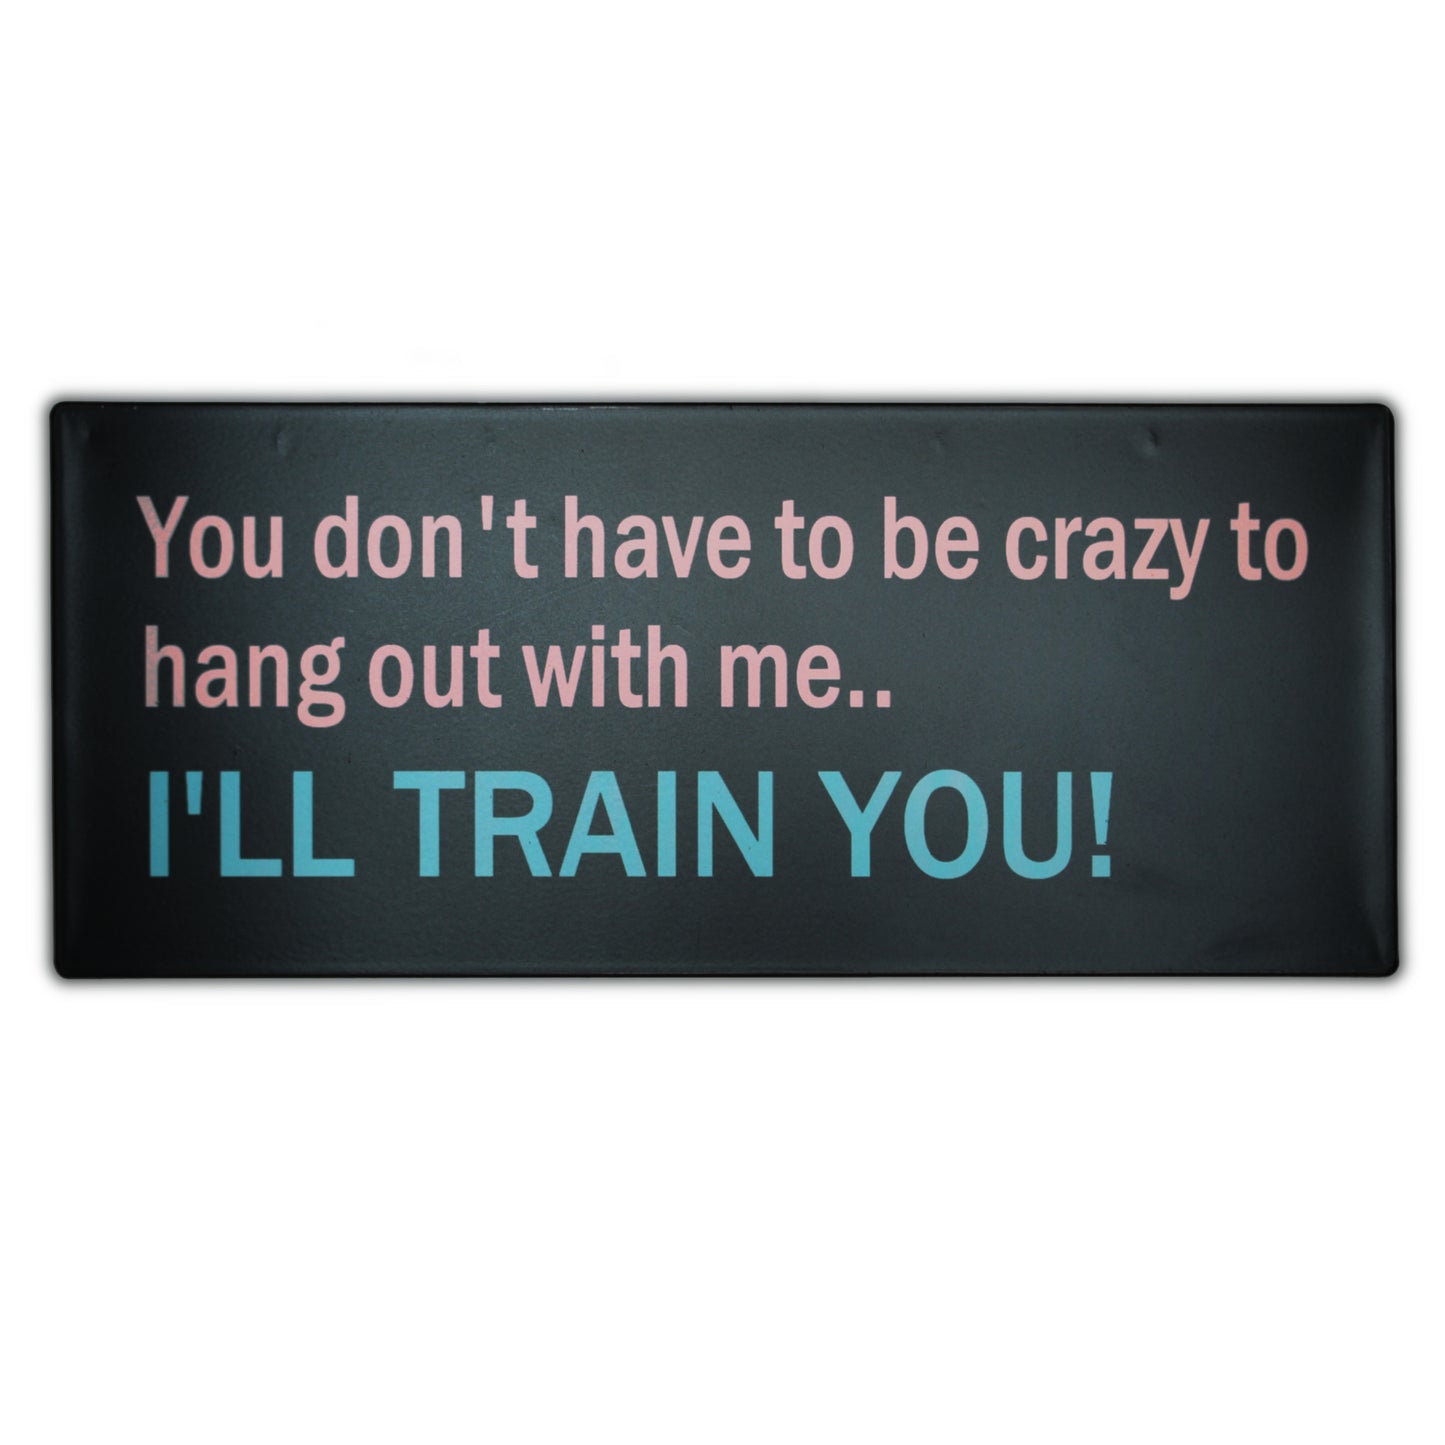 Blechschild: You don't have to be crazy to hang out with me... I'll train you